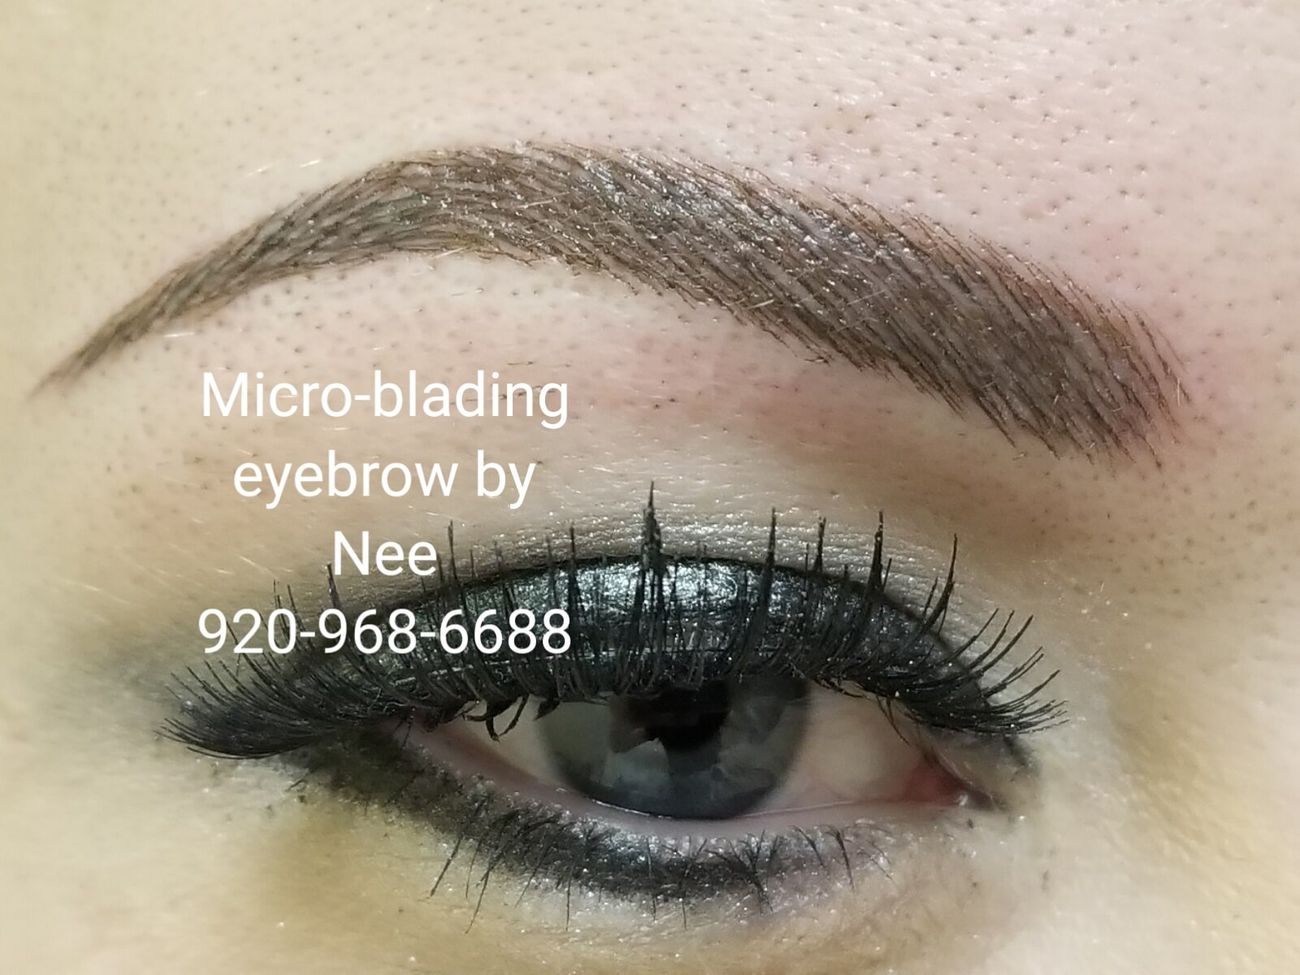 microblading eyebrows - Semi Permanent Cosmetic Tattooing in Appleton, WI